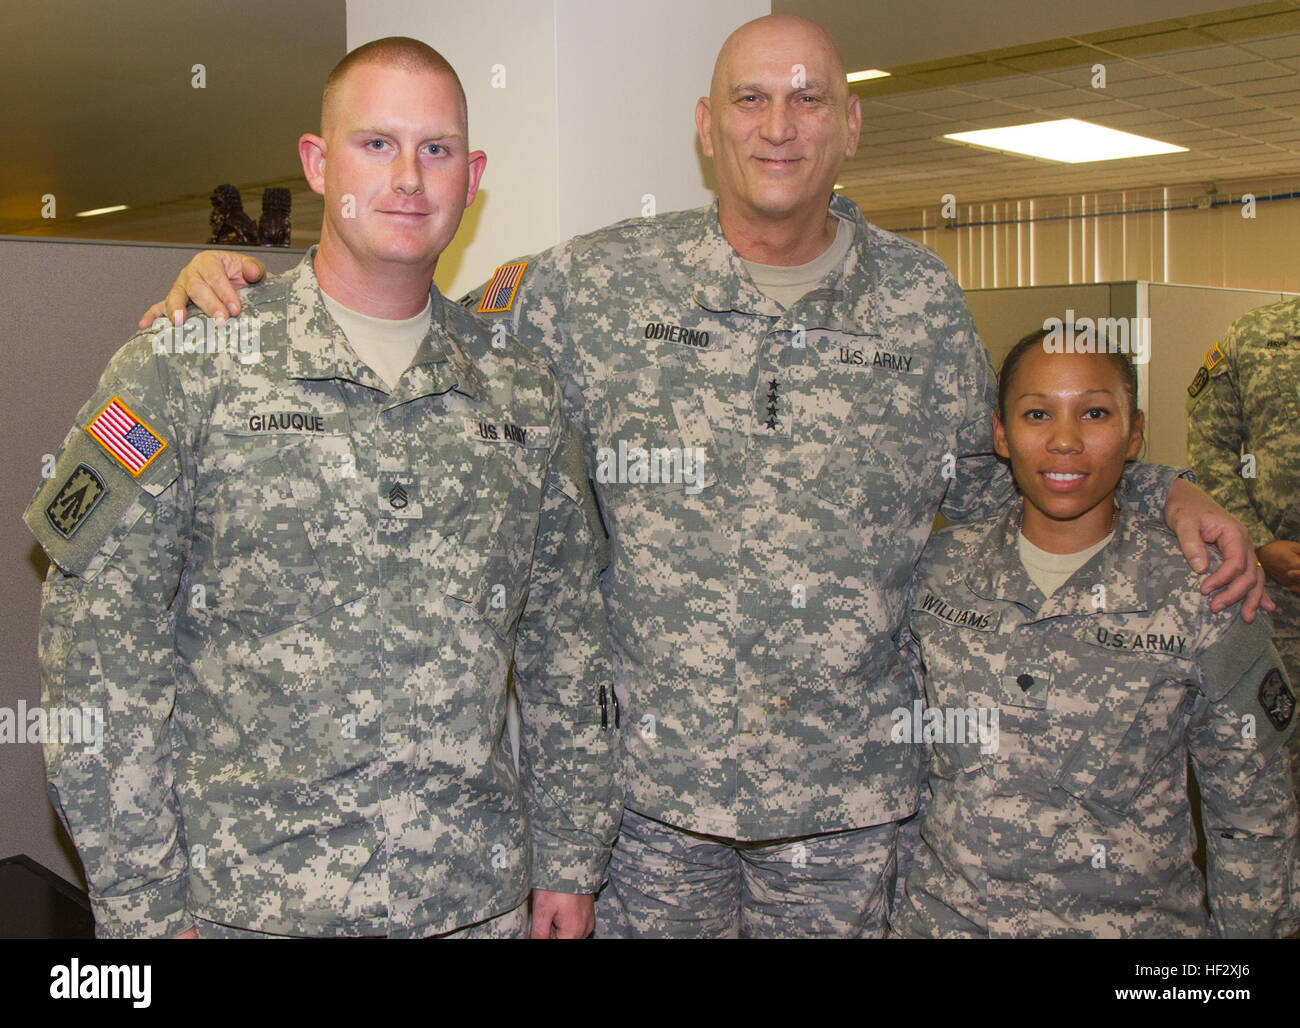 Chief of Staff of the Army Gen. Raymond T. Odierno poses for a photo with Staff Sgt. Mark Giauque, the early warning section noncommissioned officer in charge, and Spc. Christina Williams, the senior local area network analyst, 94th Army Air and Missile Defense Command, during his site tour of the 94th AAMDC’s Headquarters, Feb. 11, 2015, at Joint Base Pearl Harbor-Hickam, Hawaii. Giauque is the Noncommissioned Officer of the Year and Williams is the Soldier of the Year for the 94th AAMDC. (U.S. Army Photo by Sgt. Kimberly K. Menzies, 94th AAMDC Public Affairs) Chief of staff of the Army visit Stock Photo